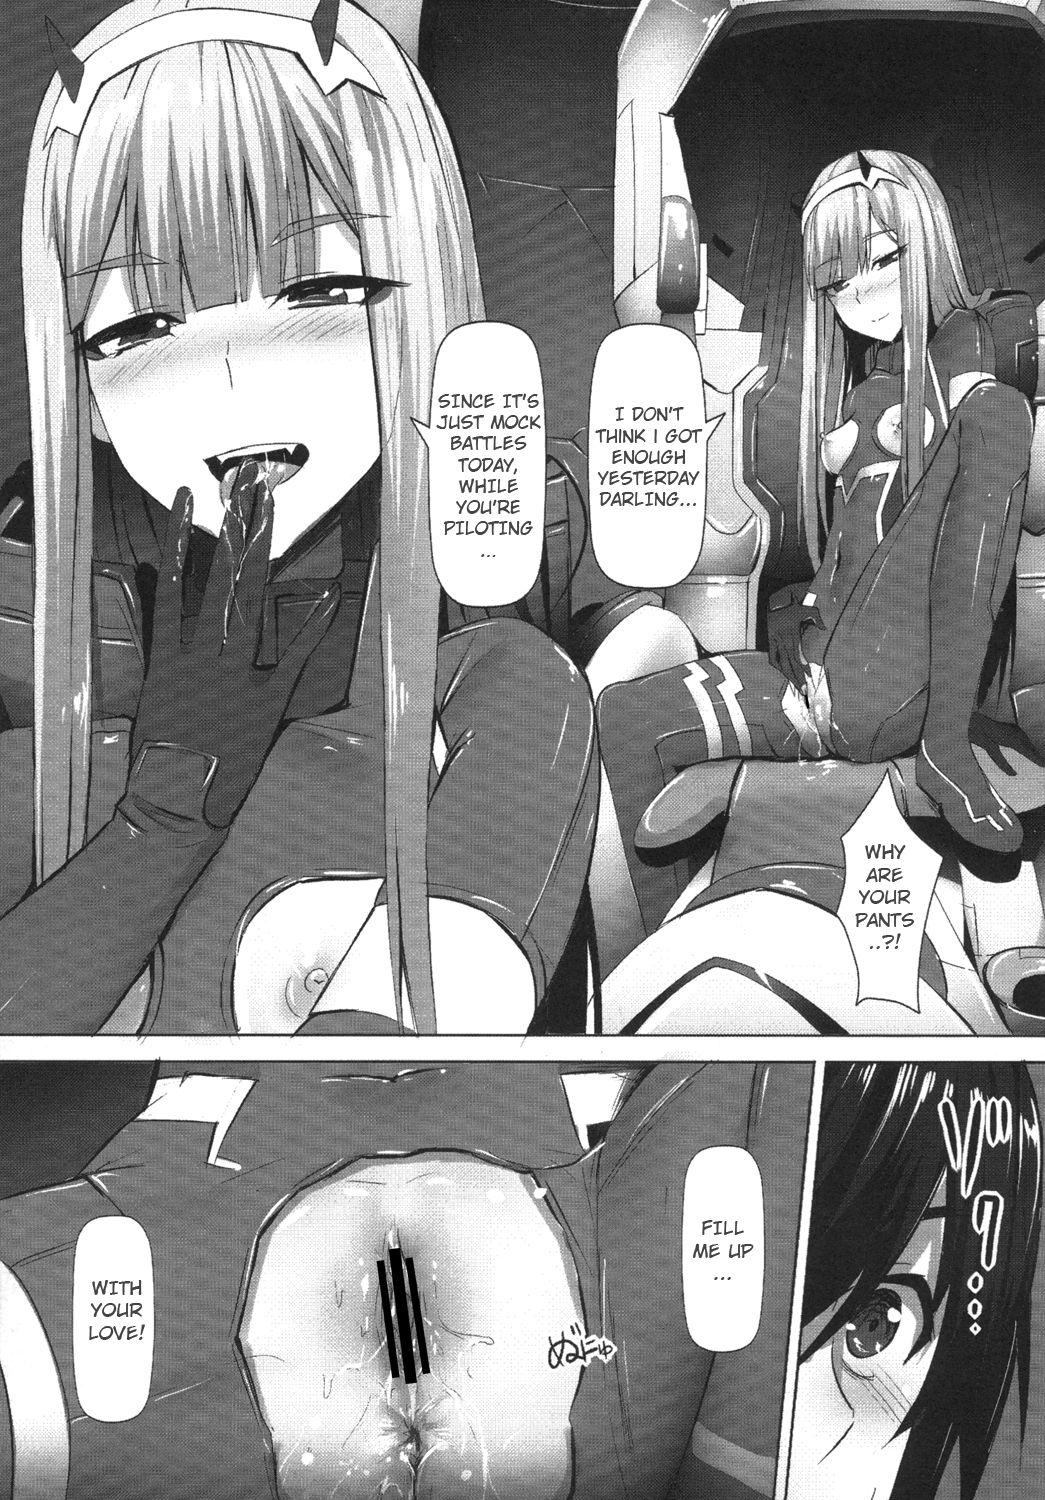 Russian Darling need more Sexx - Darling in the franxx Beauty - Page 10